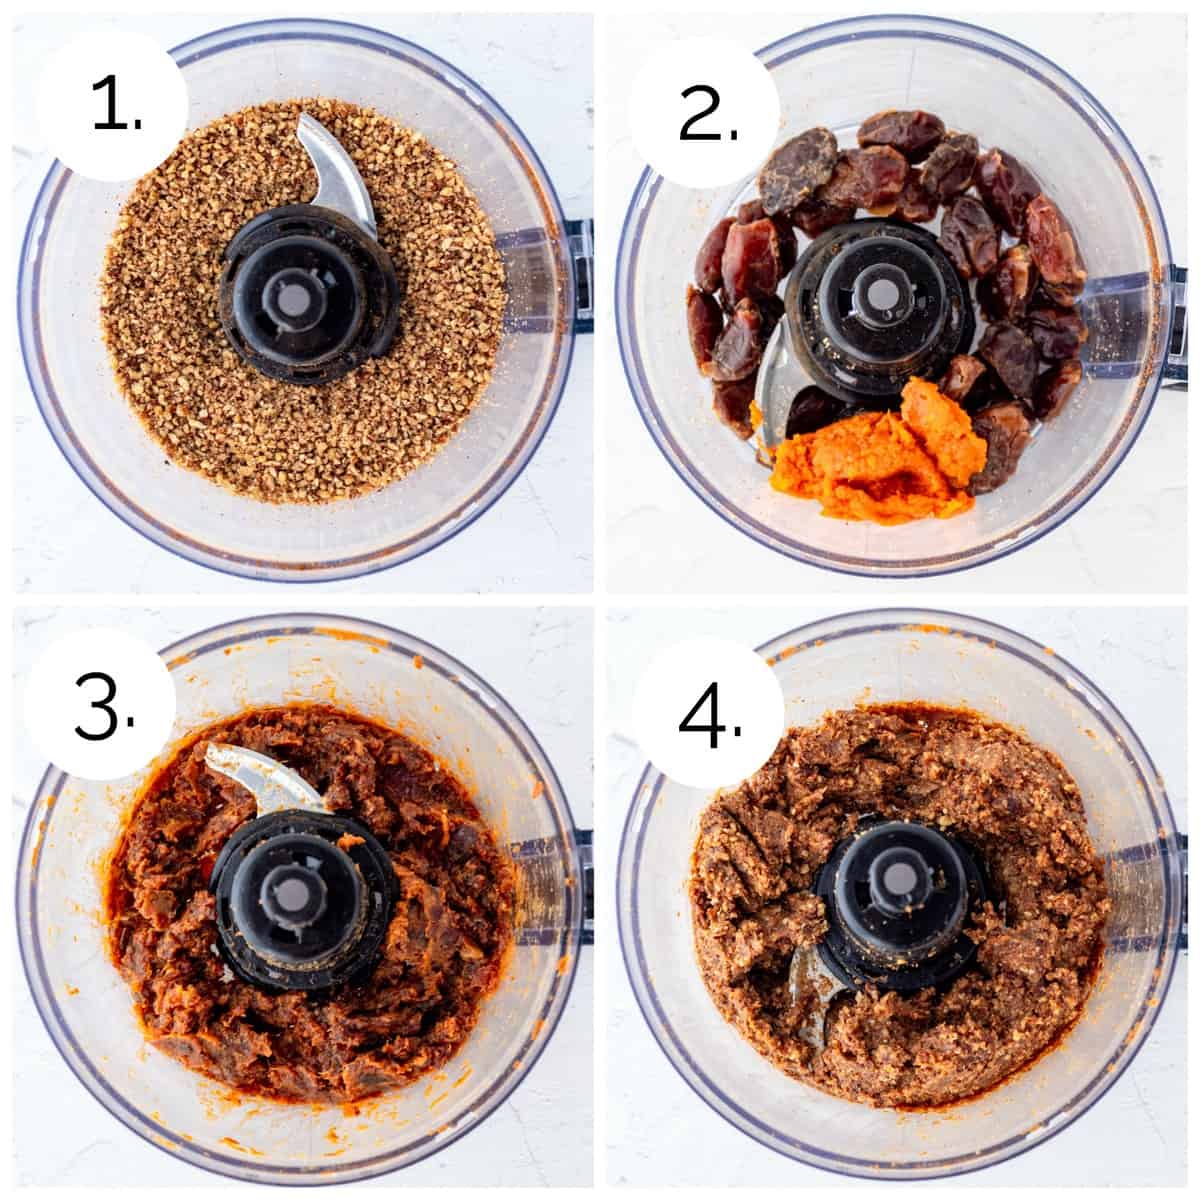 Four photos to show how to process the ingredients